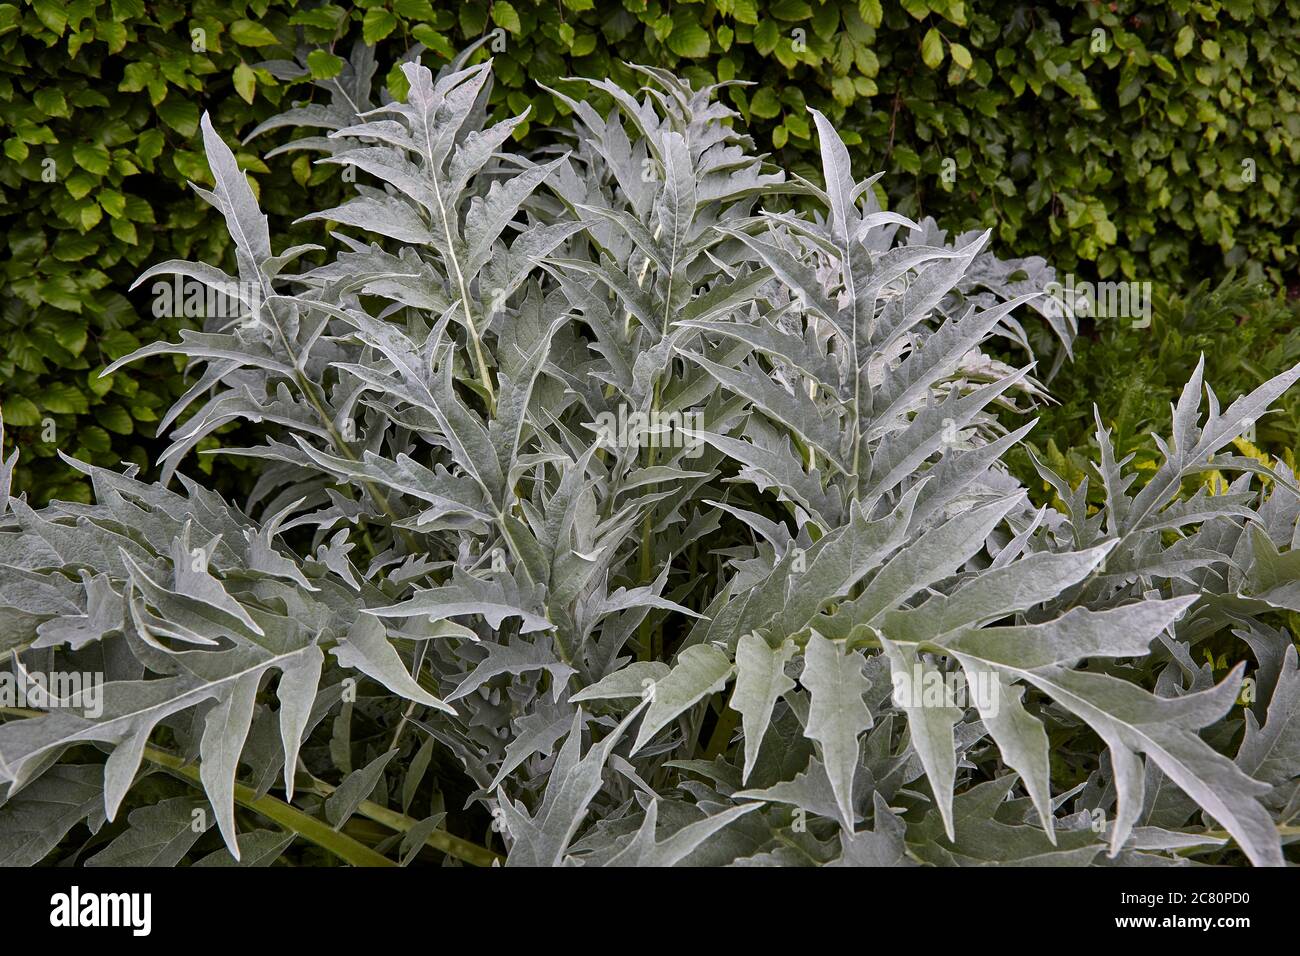 Silver-grey leaves of the Cynara cardunculus, a Mediterranean-type plant, commonly called cardoon Stock Photo